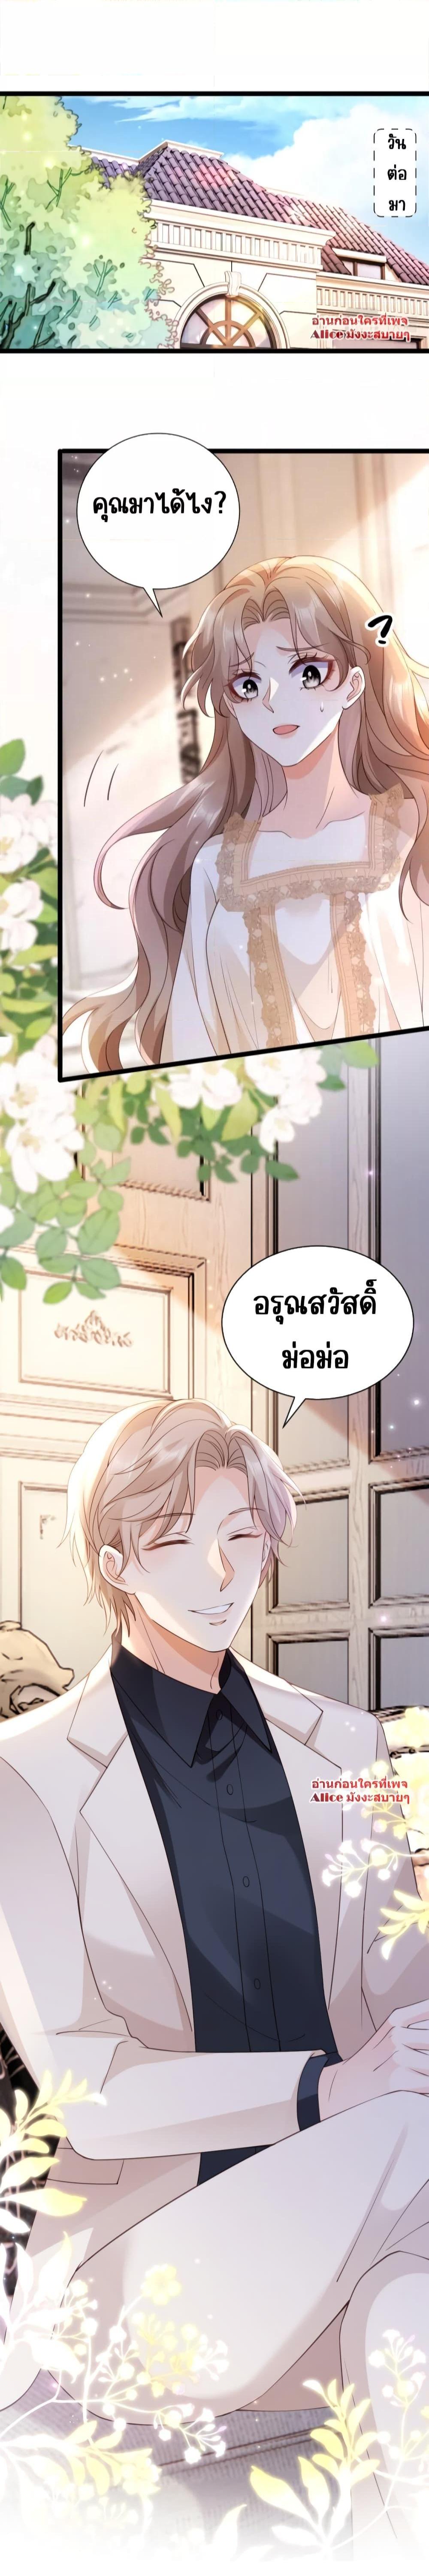 Goxuewen Female Supporting Role She Quit โ€“ เธเธญเธเธฐเธ—เธตเธเธฑเธเธเธ—เธขเธฑเธขเธ•เธฑเธงเธฃเนเธฒเธขเนเธเธเธดเธขเธฒเธขเธเนเธณเน€เธเนเธฒ เธ•เธญเธเธ—เธตเน 7 (14)